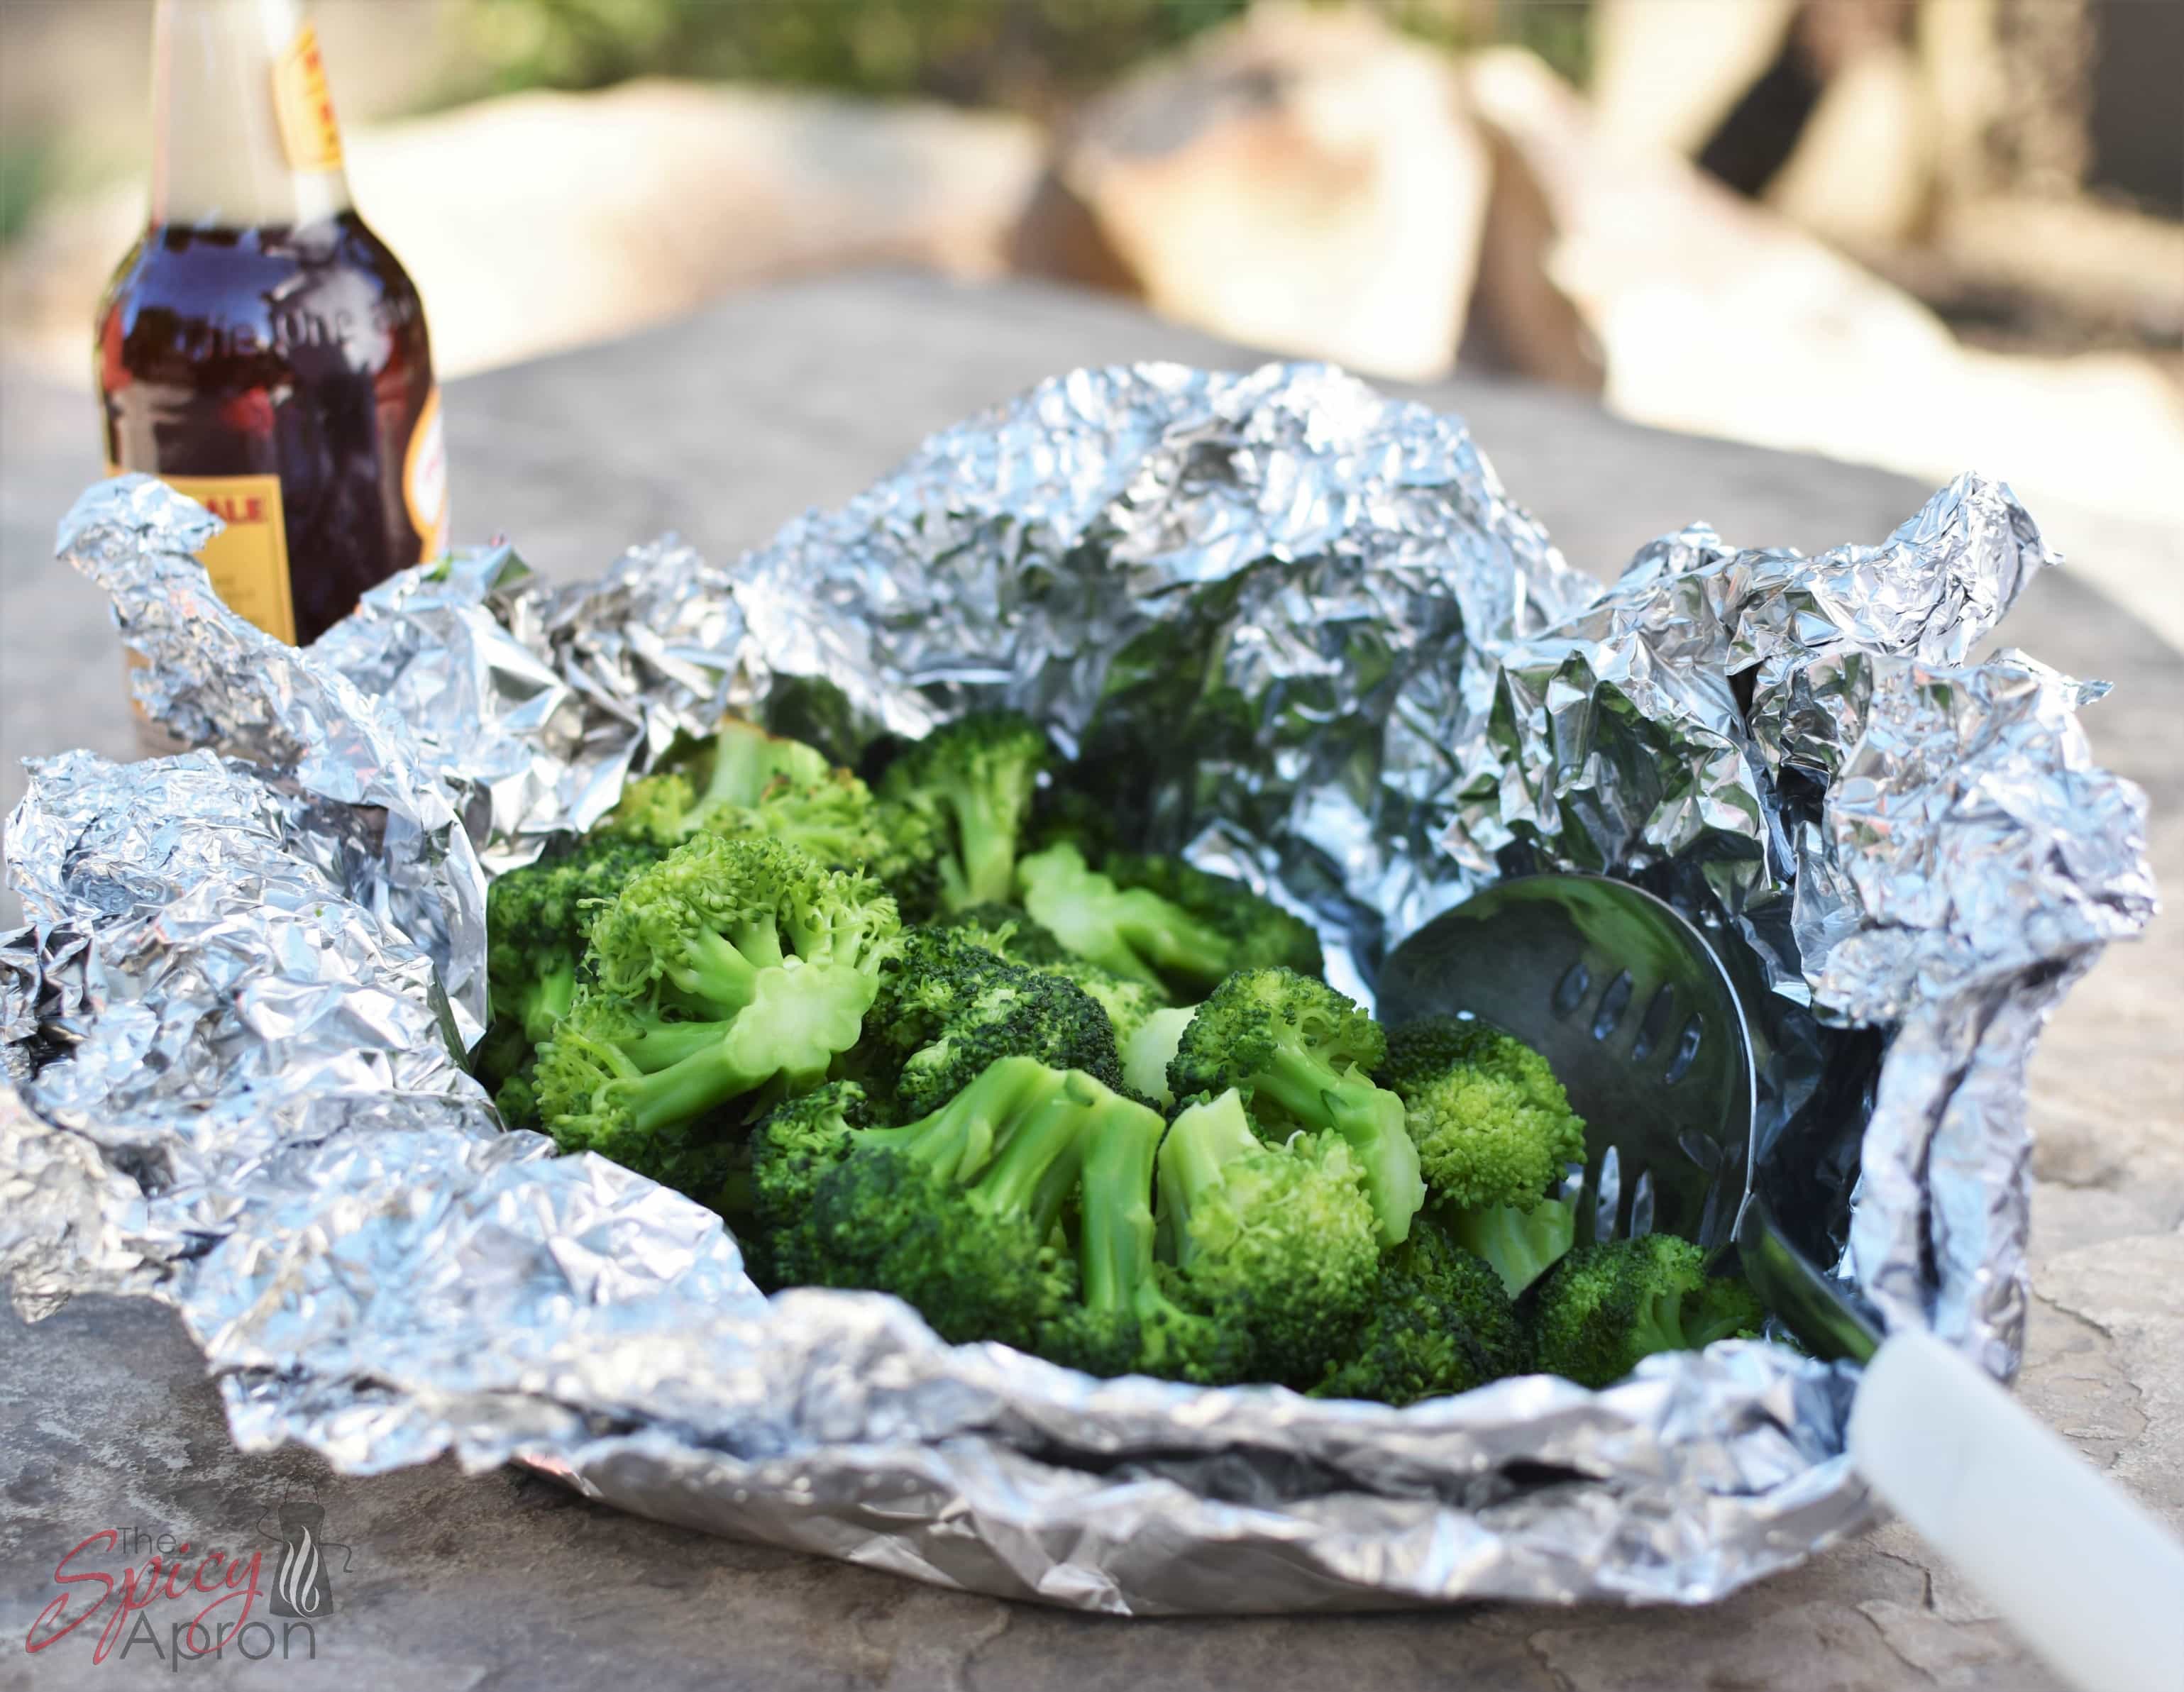 How To Make Fresh Steamed Broccoli When Camping The Spicy Apron,Cooking Octopus With Cork